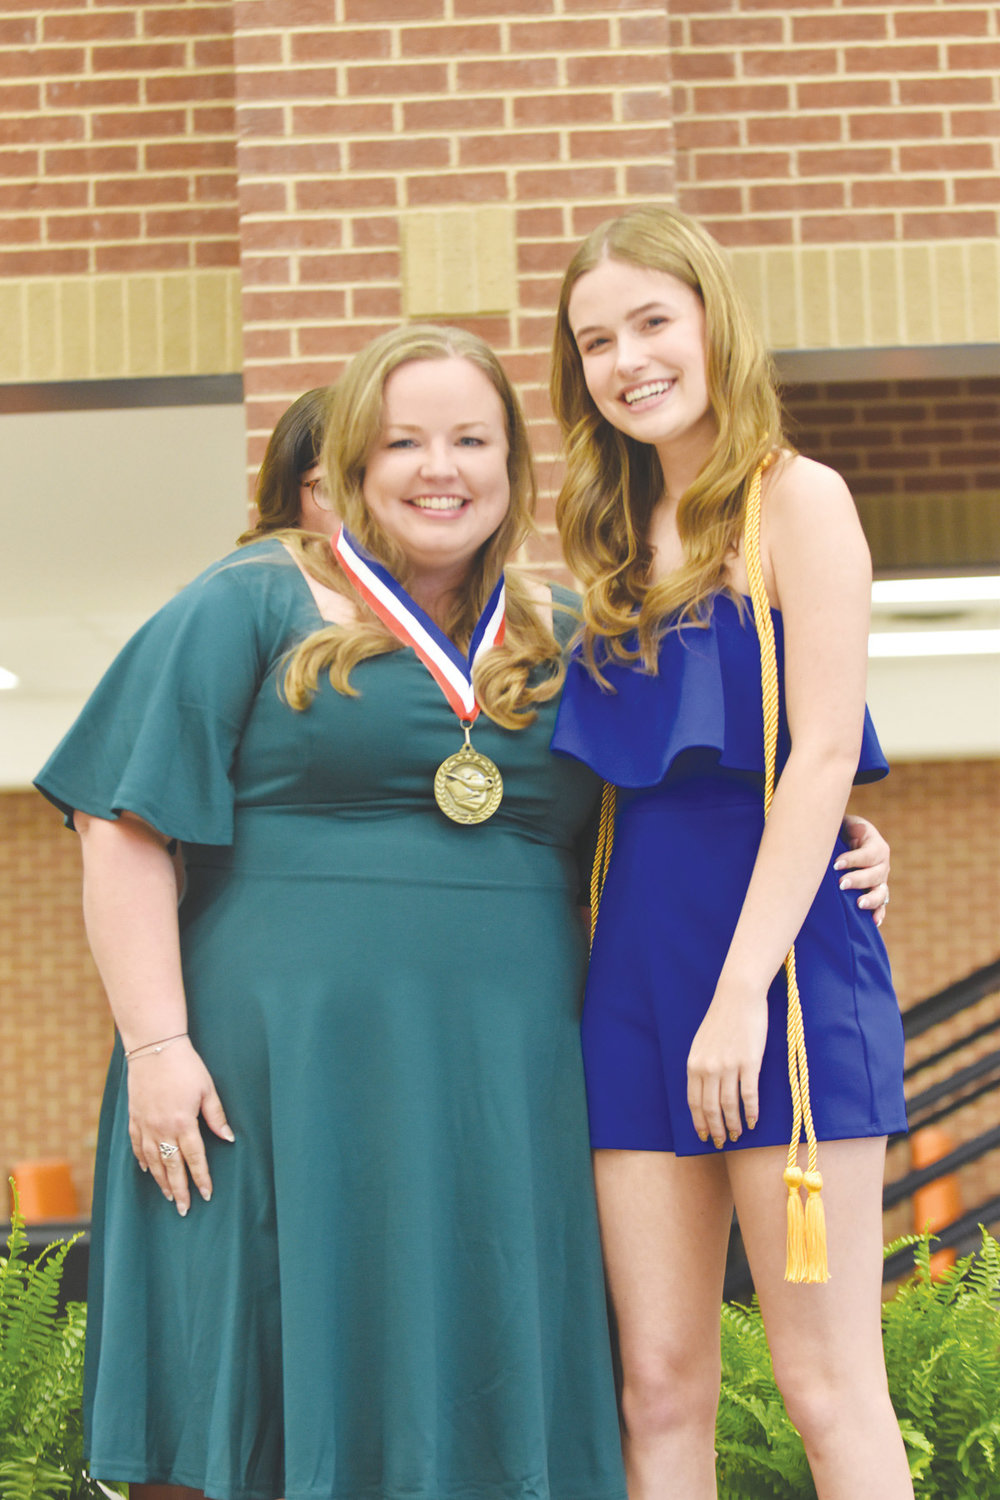 Payton Brooks is the daughter of Steve and Lorna Brooks. Payton plans to attend Texas A&M’s Public Health Program, go to nursing school, and become a pediatric nurse. Payton honored Mrs. Courteney Goforth